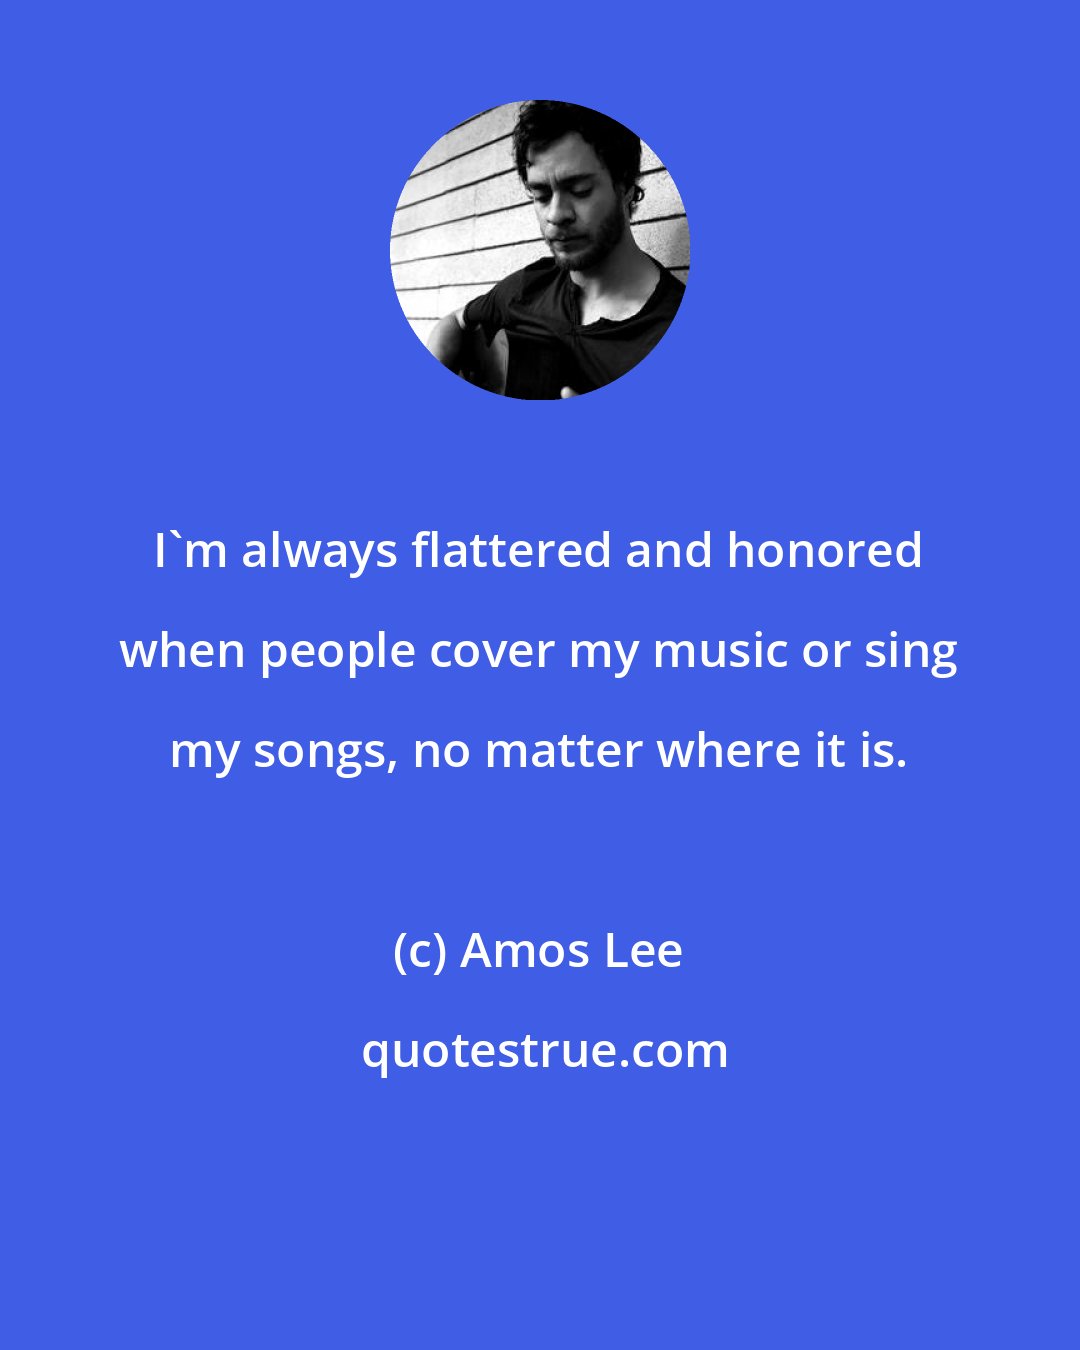 Amos Lee: I'm always flattered and honored when people cover my music or sing my songs, no matter where it is.